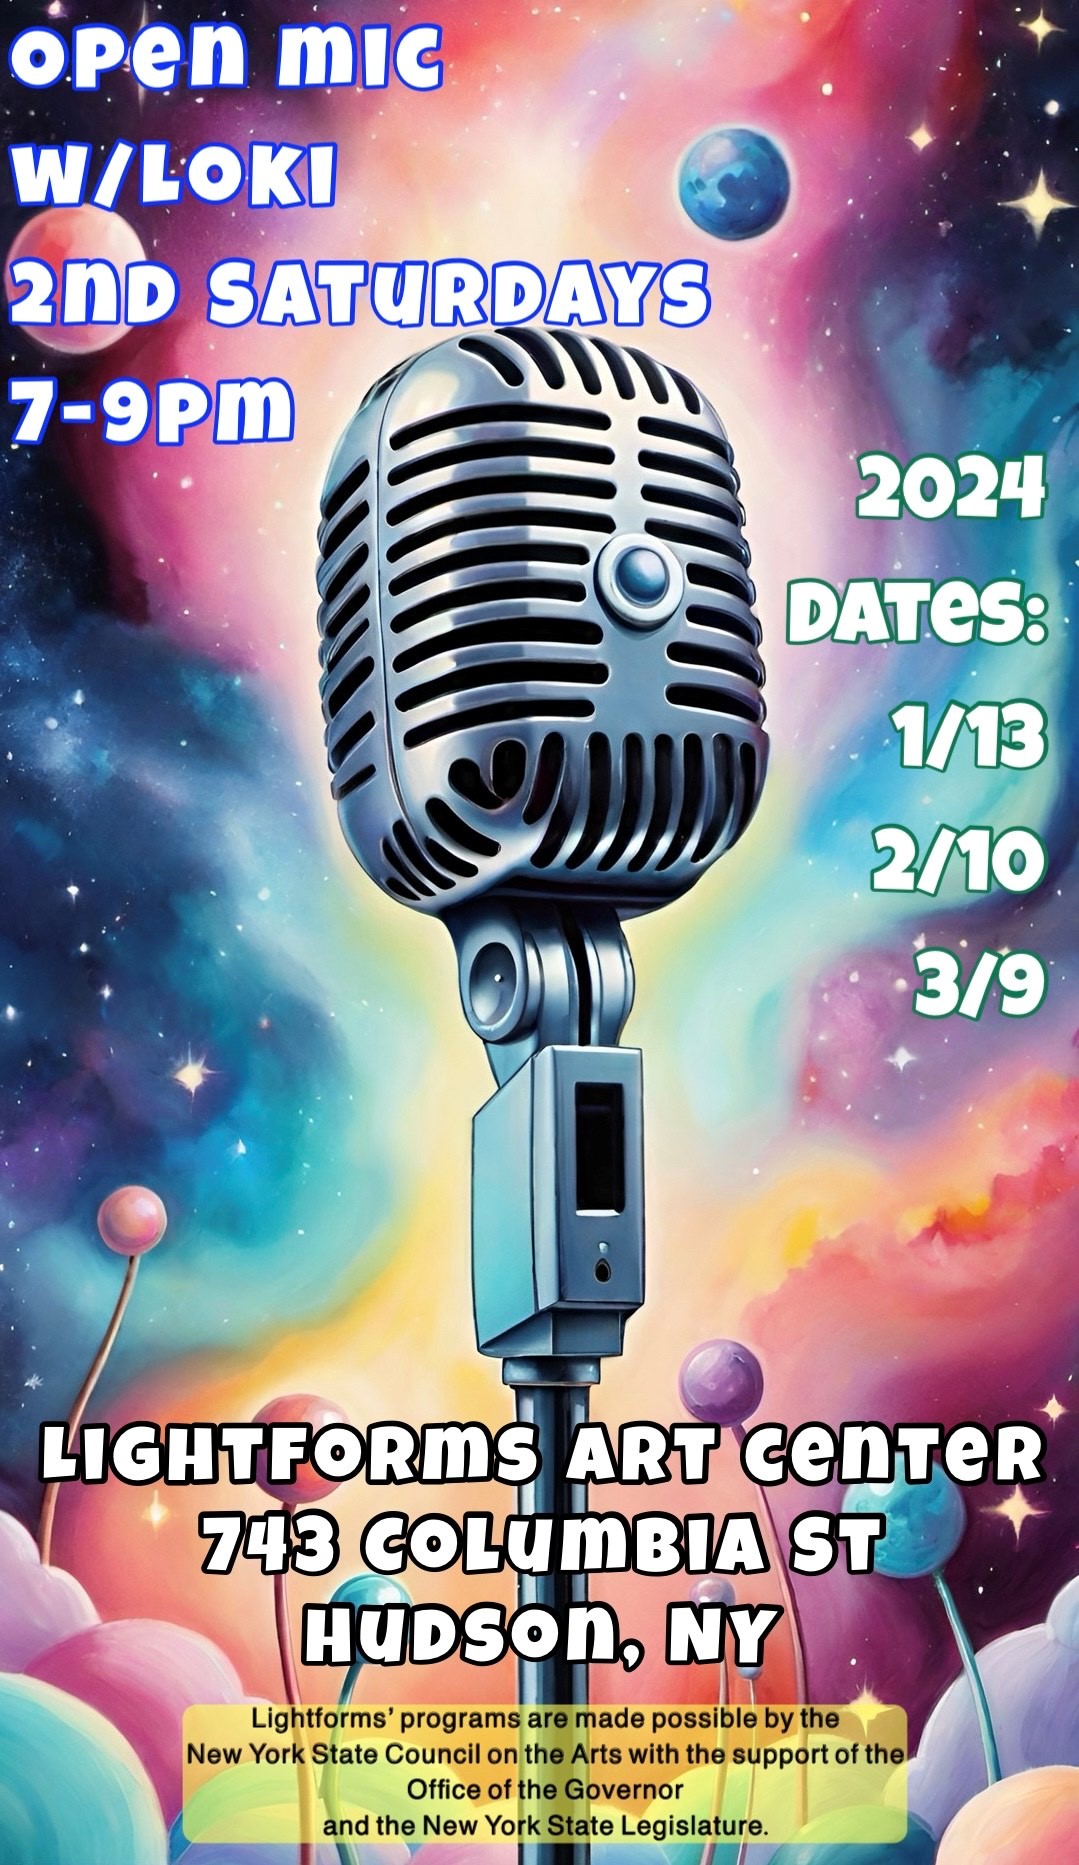 Loki's open mic night poster. The info is written on it with the image being a cartoon galaxy background and cartoon old fashioned microphone